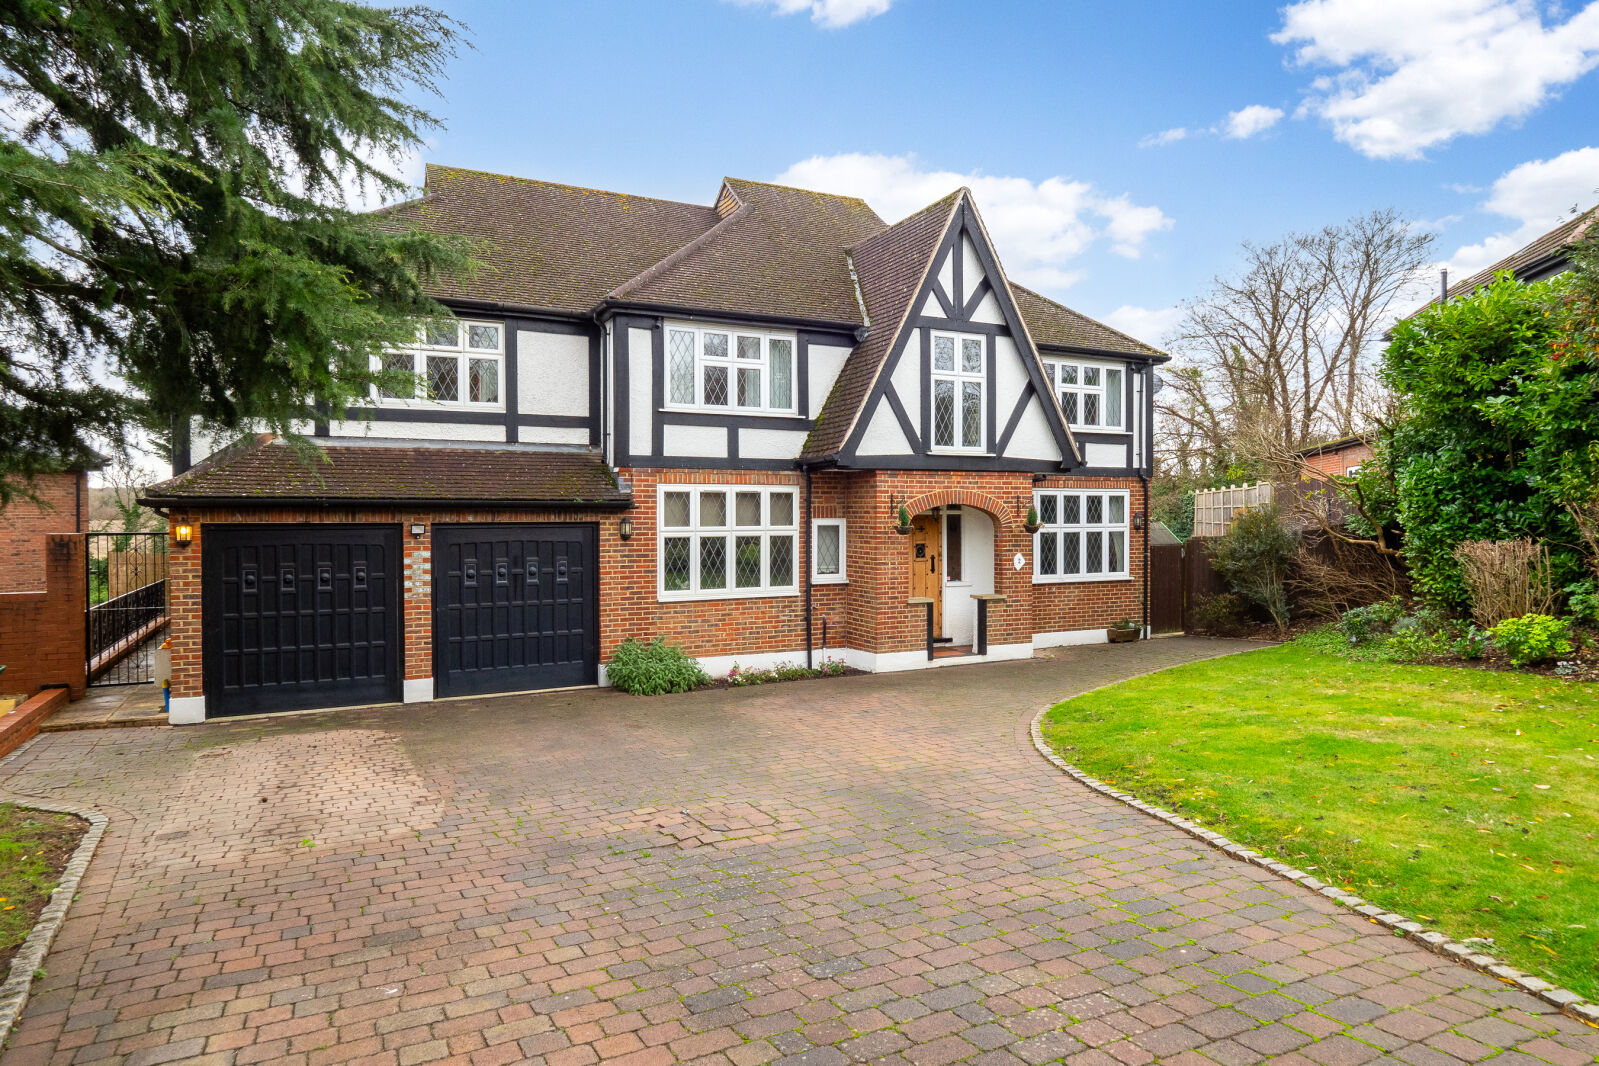 5 bedroom detached house for sale Wotton Way, Cheam, SM2, main image